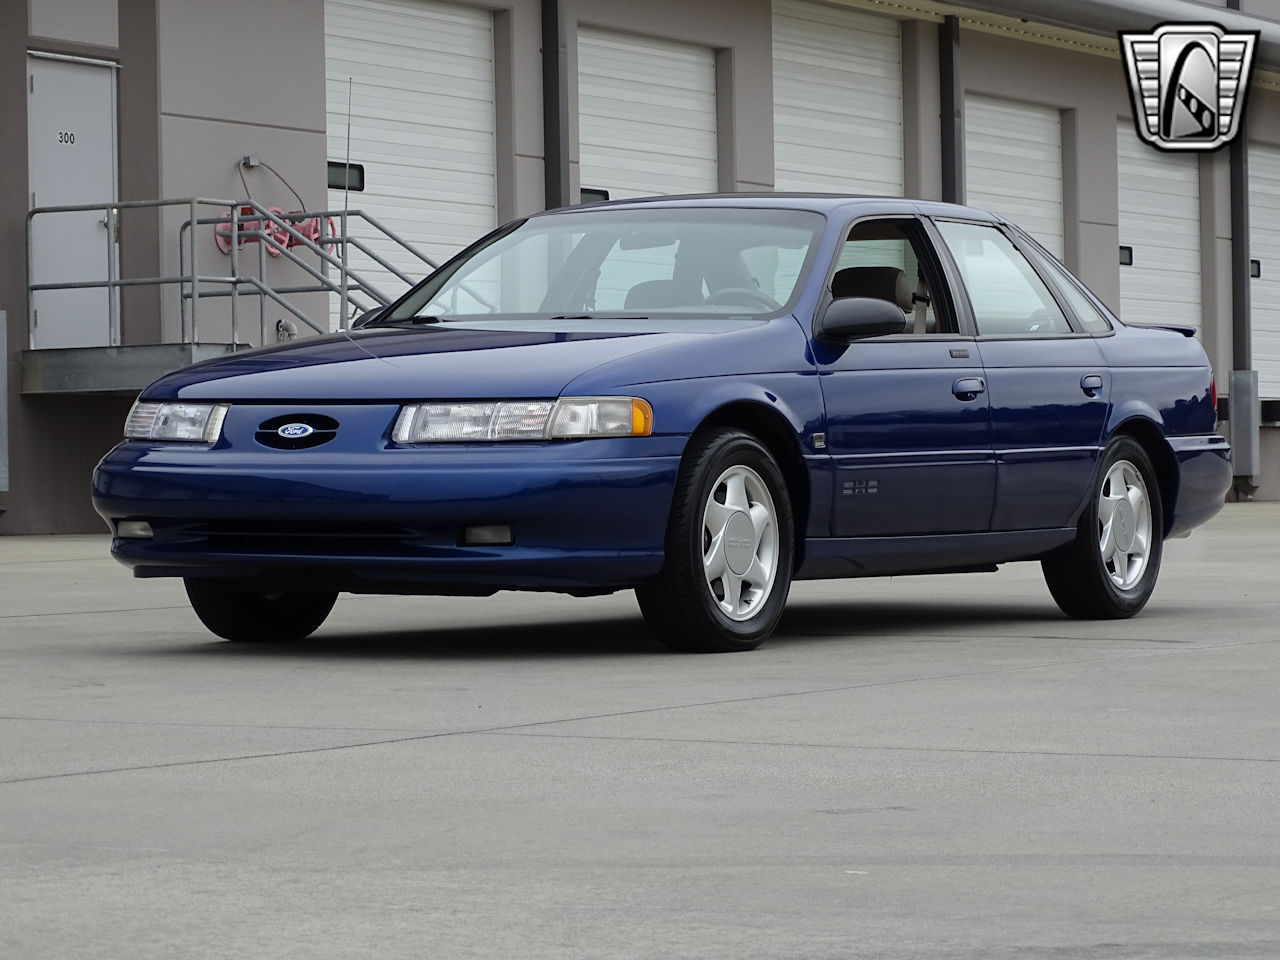 Beautiful 1995 Ford Taurus SHO Is Selling For A Hefty Price: Video